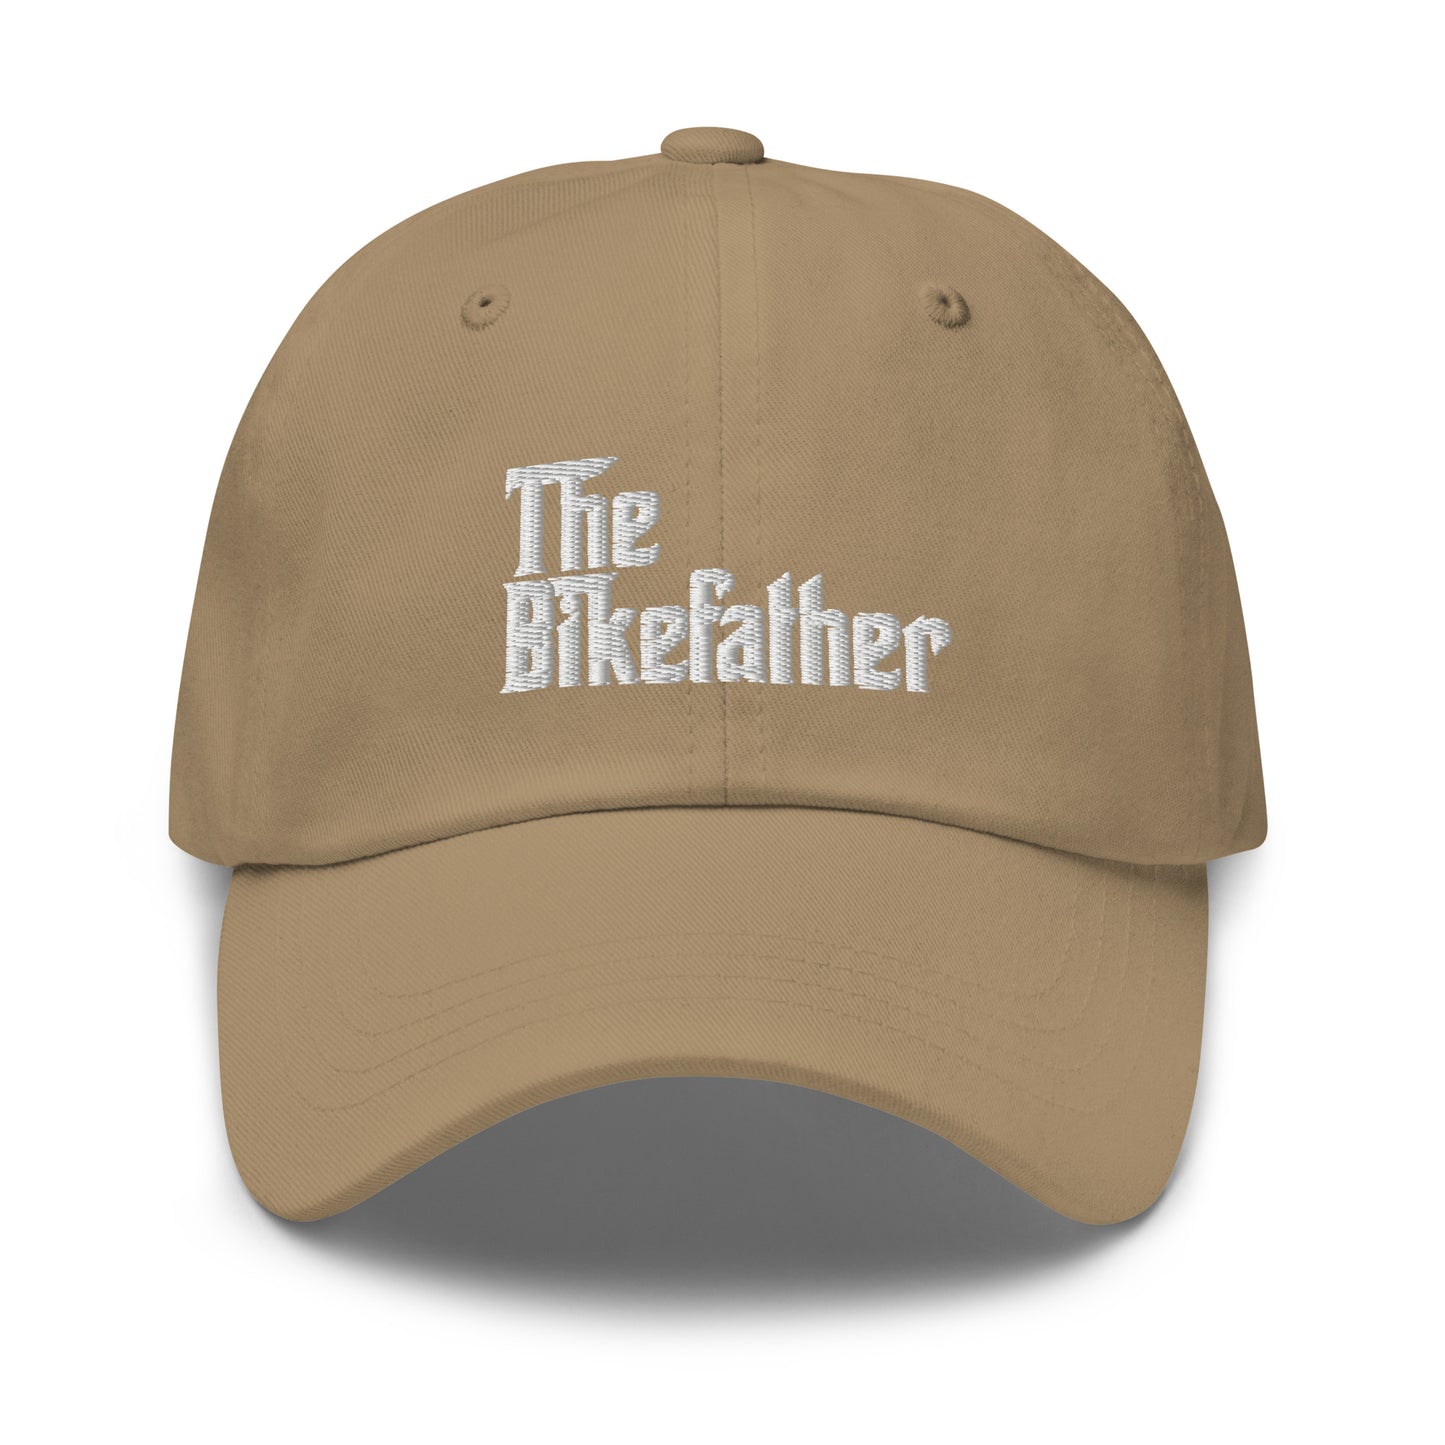 The Bikefather funny cap hat Fathers Day gift for Cycling dads bike lovers  embroidered  khaki